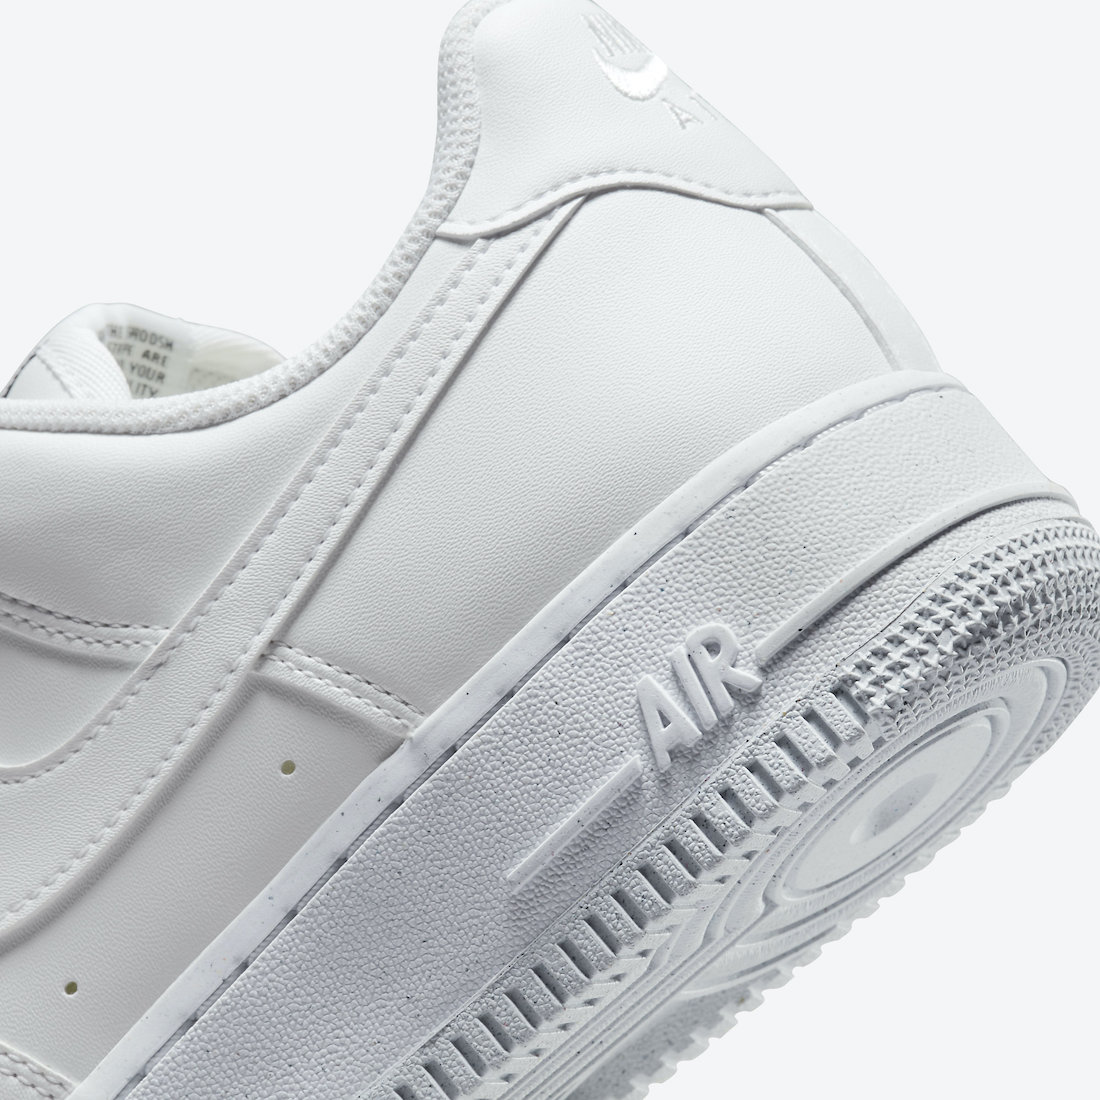 Nike Air Force 1 Low White DC9486-101 Release Date